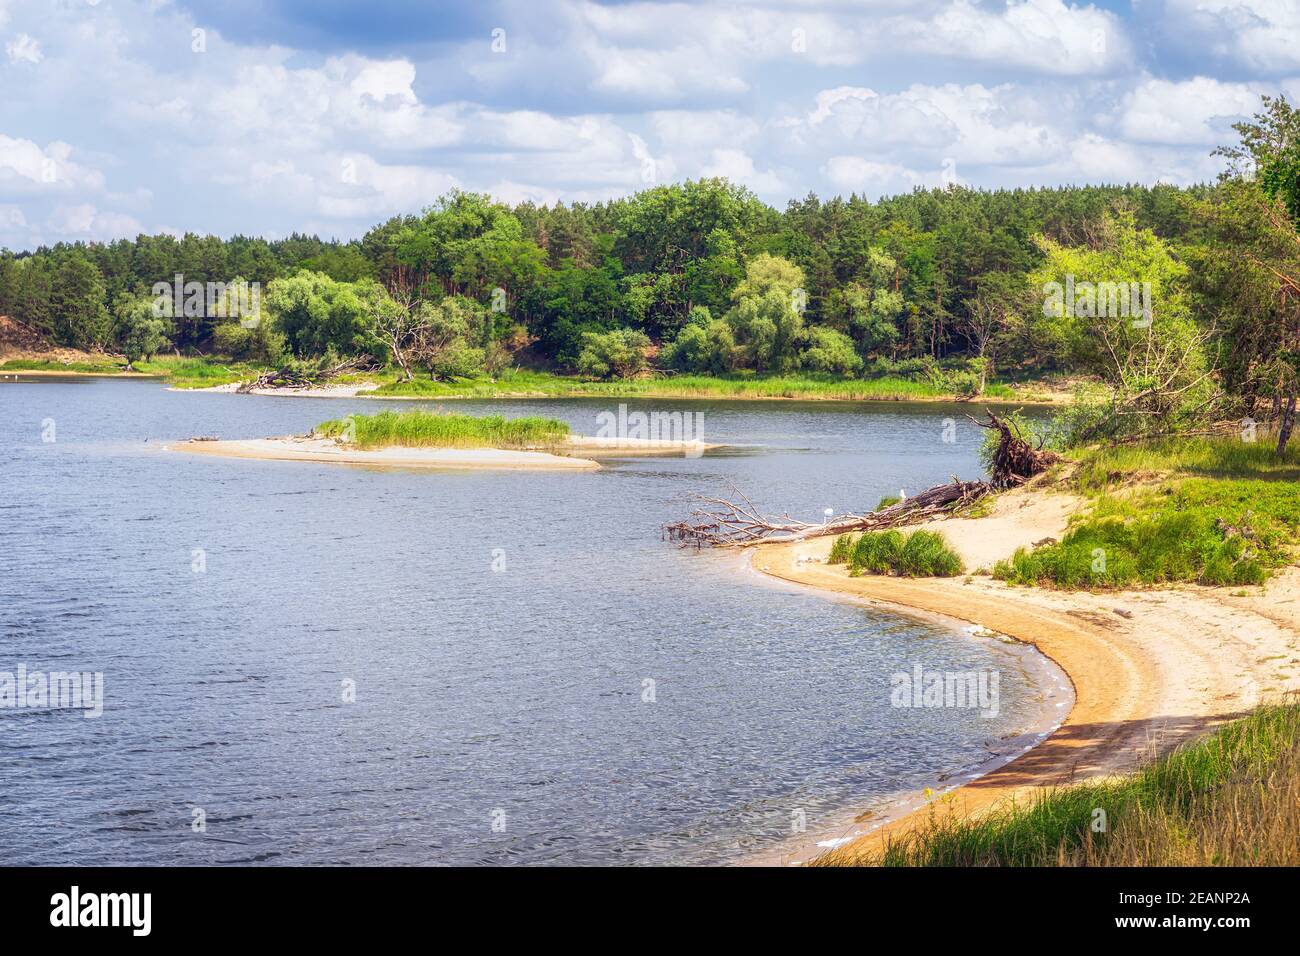 Small wield beach with island on a lake sounded by birch and pine forest. Stock Photo